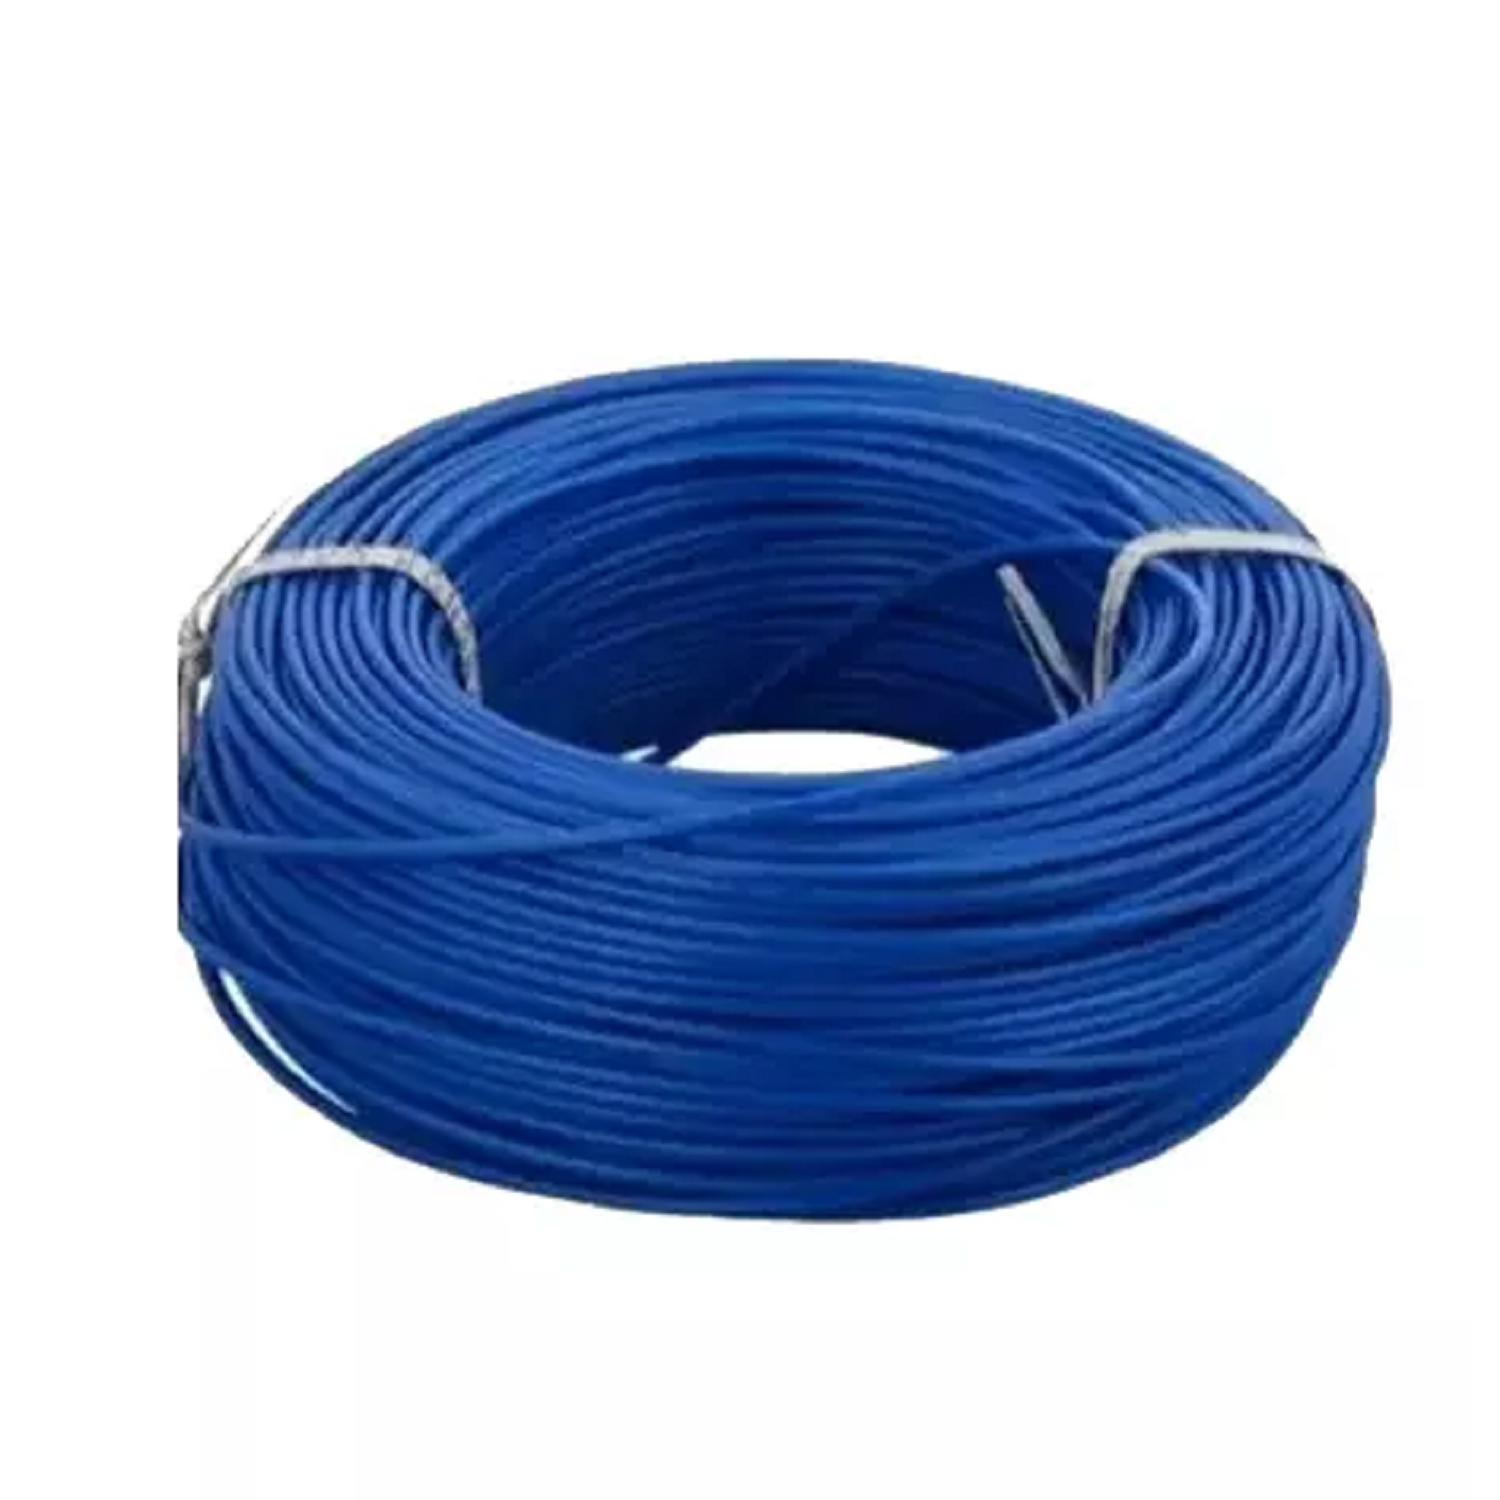 4.0 Sqmm KEI FR Single Core Copper Wire (180 Mtr) With PVC Insulated for Domestic & Industrial Uses